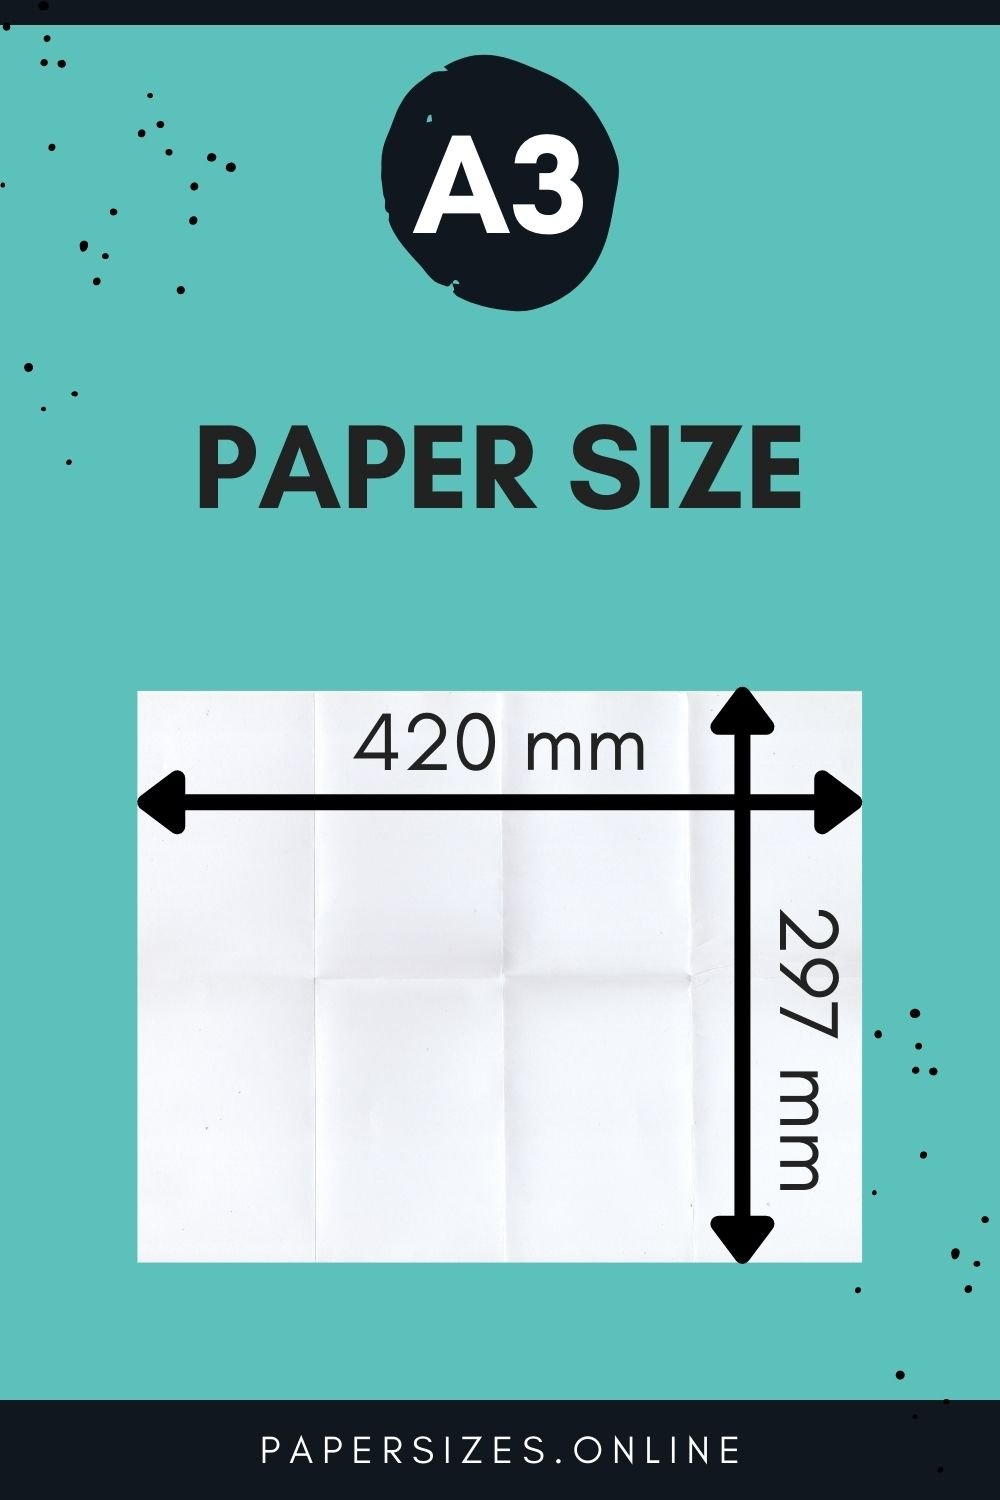 a3-paper-size-and-dimensions-paper-sizes-online